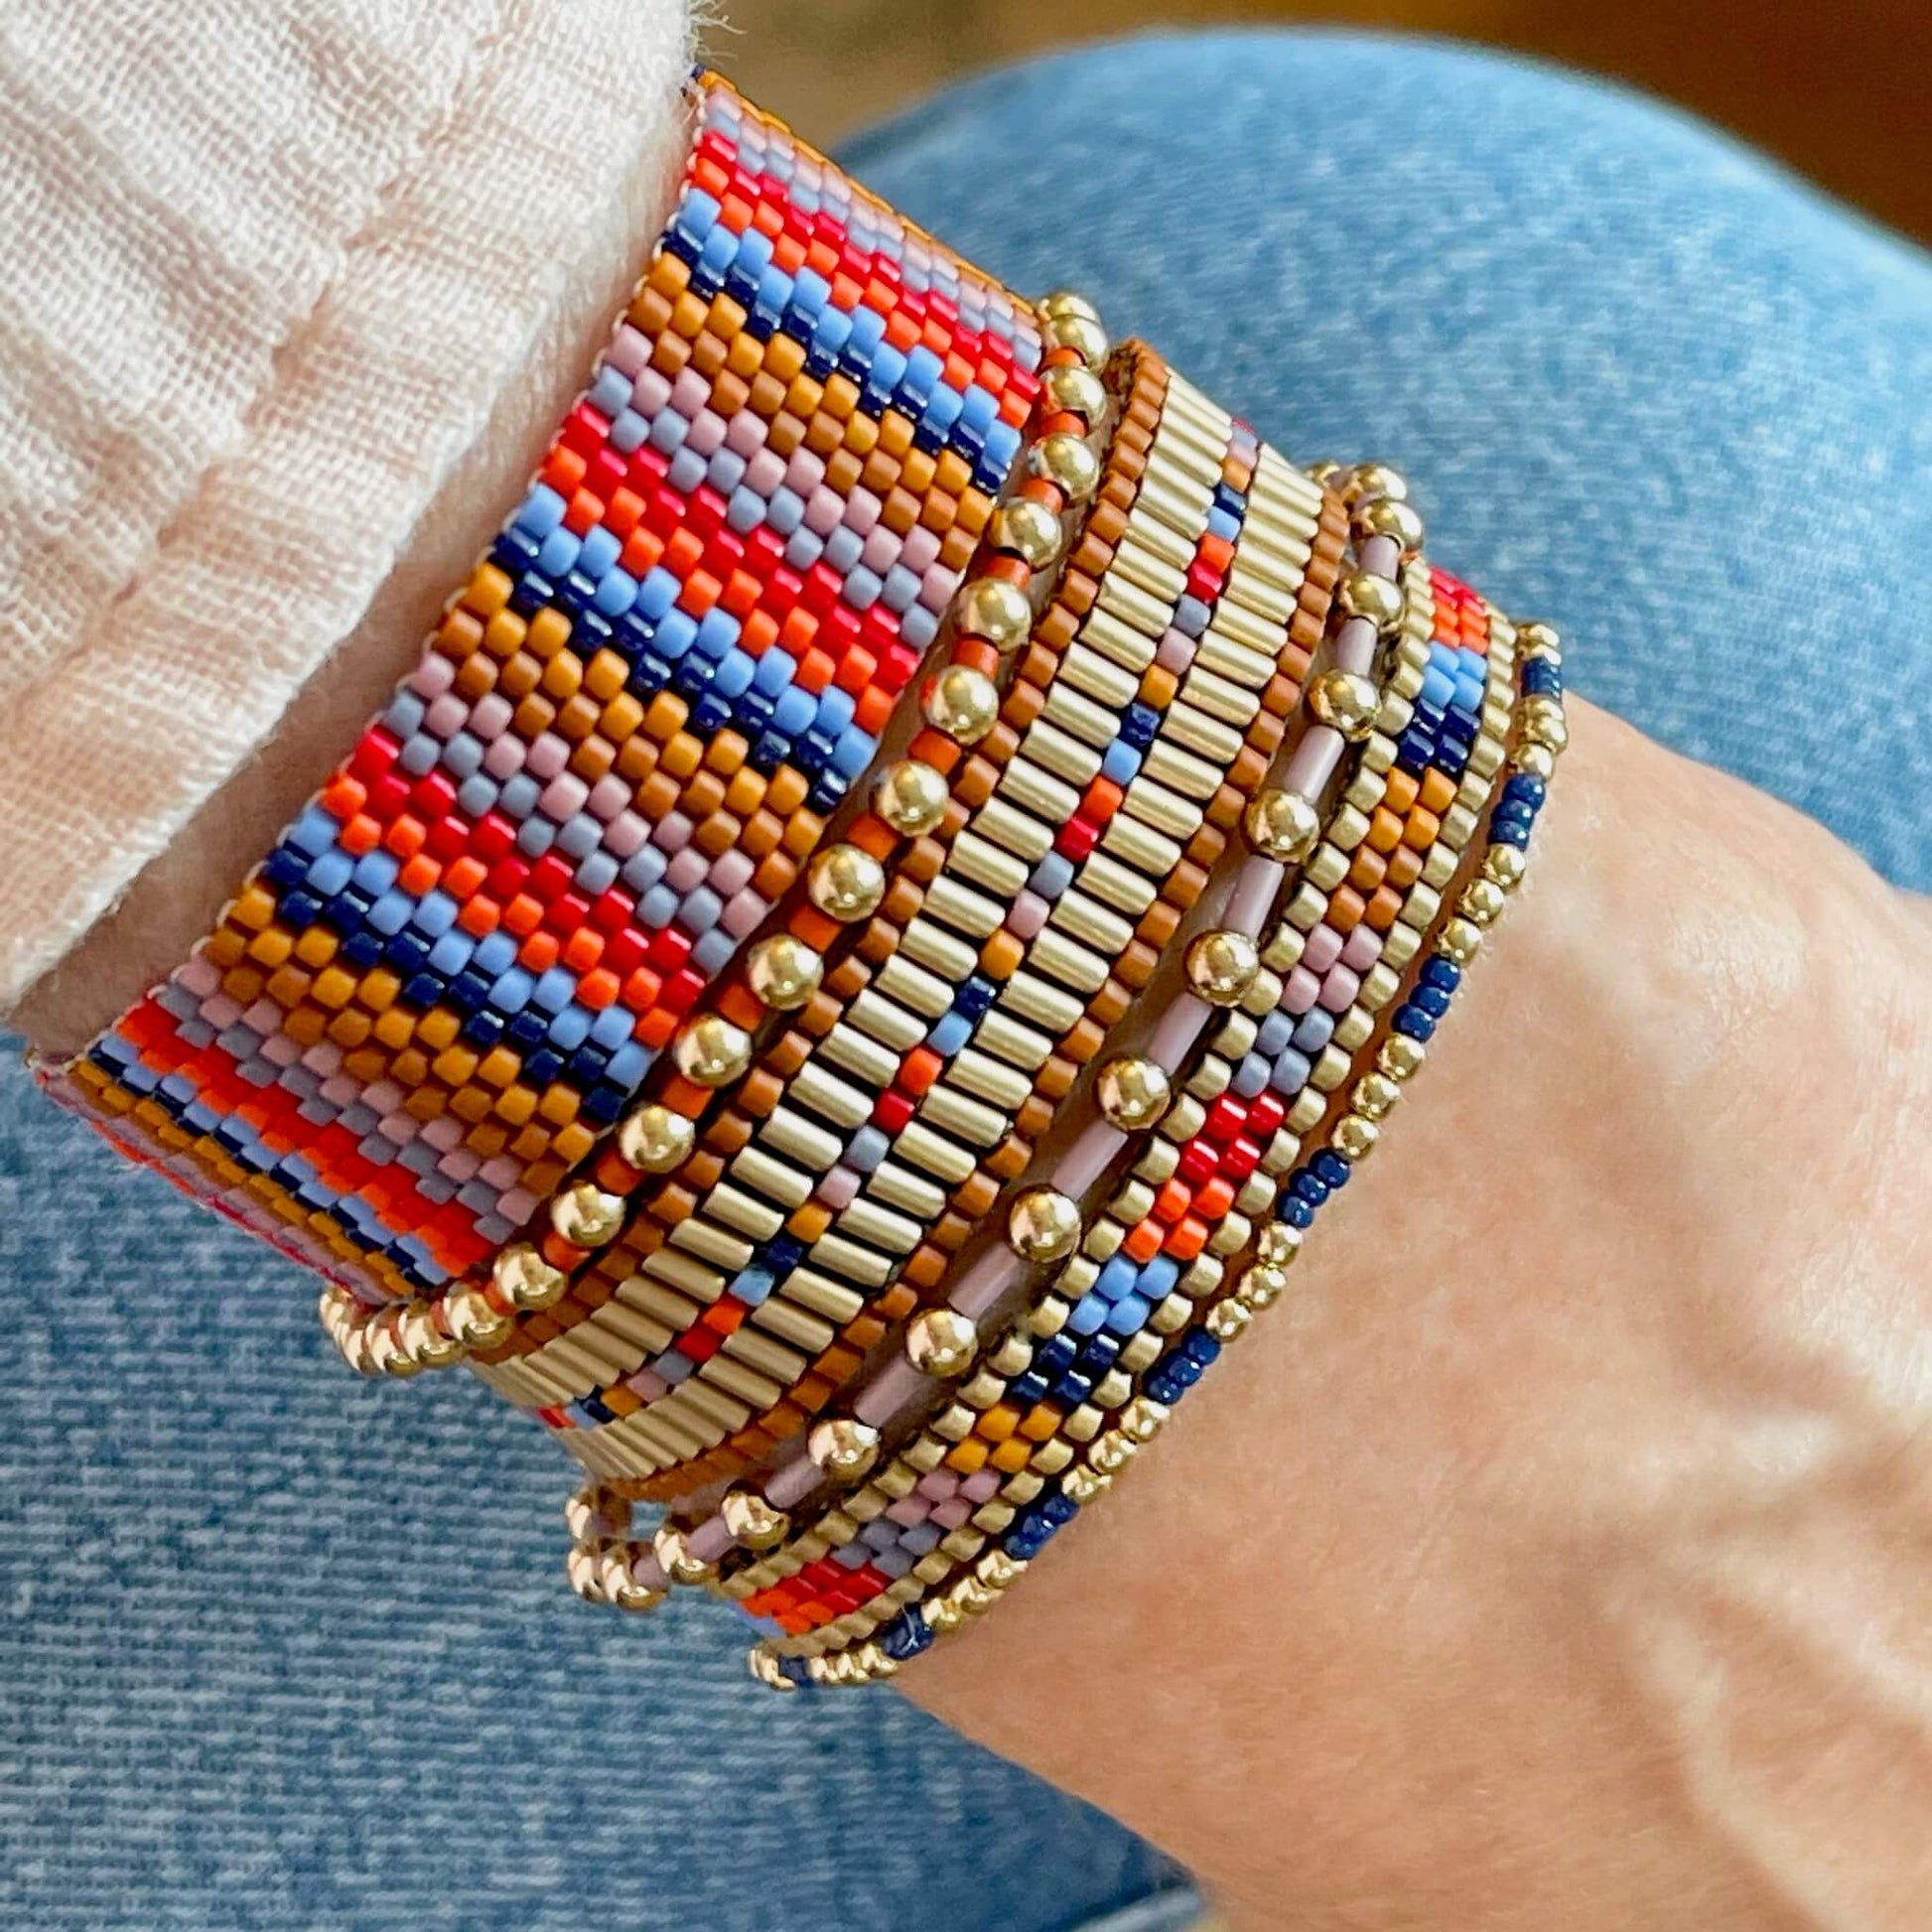 Southwestern inspired multi-color bright beaded bracelet stack of 6 with 3 woven and 3 stretch bracelets.